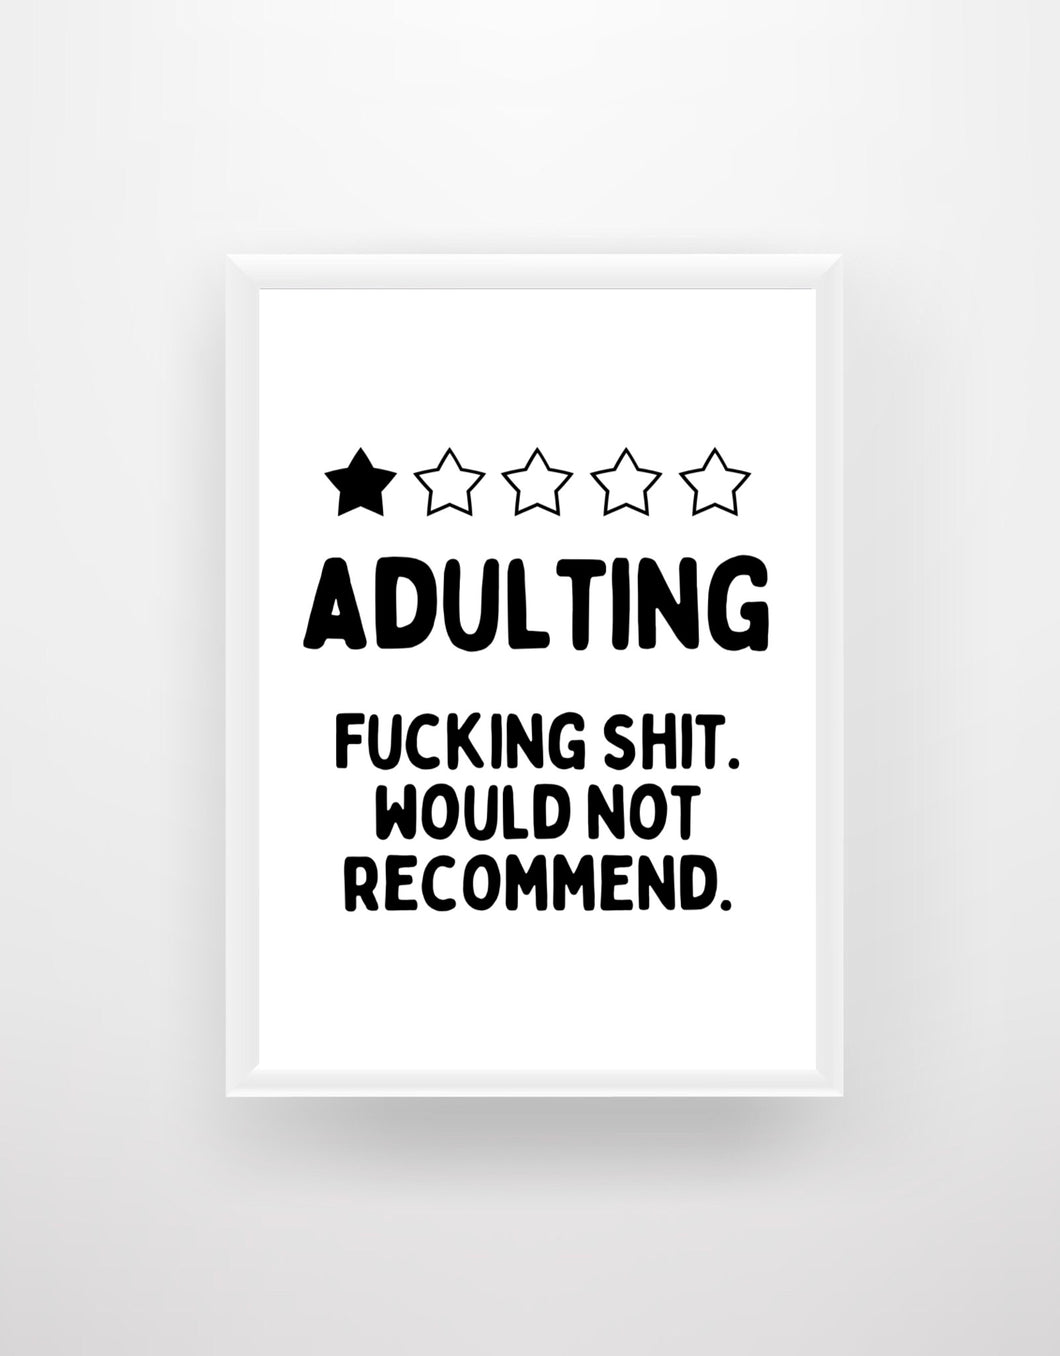 Adulting - 1 Star